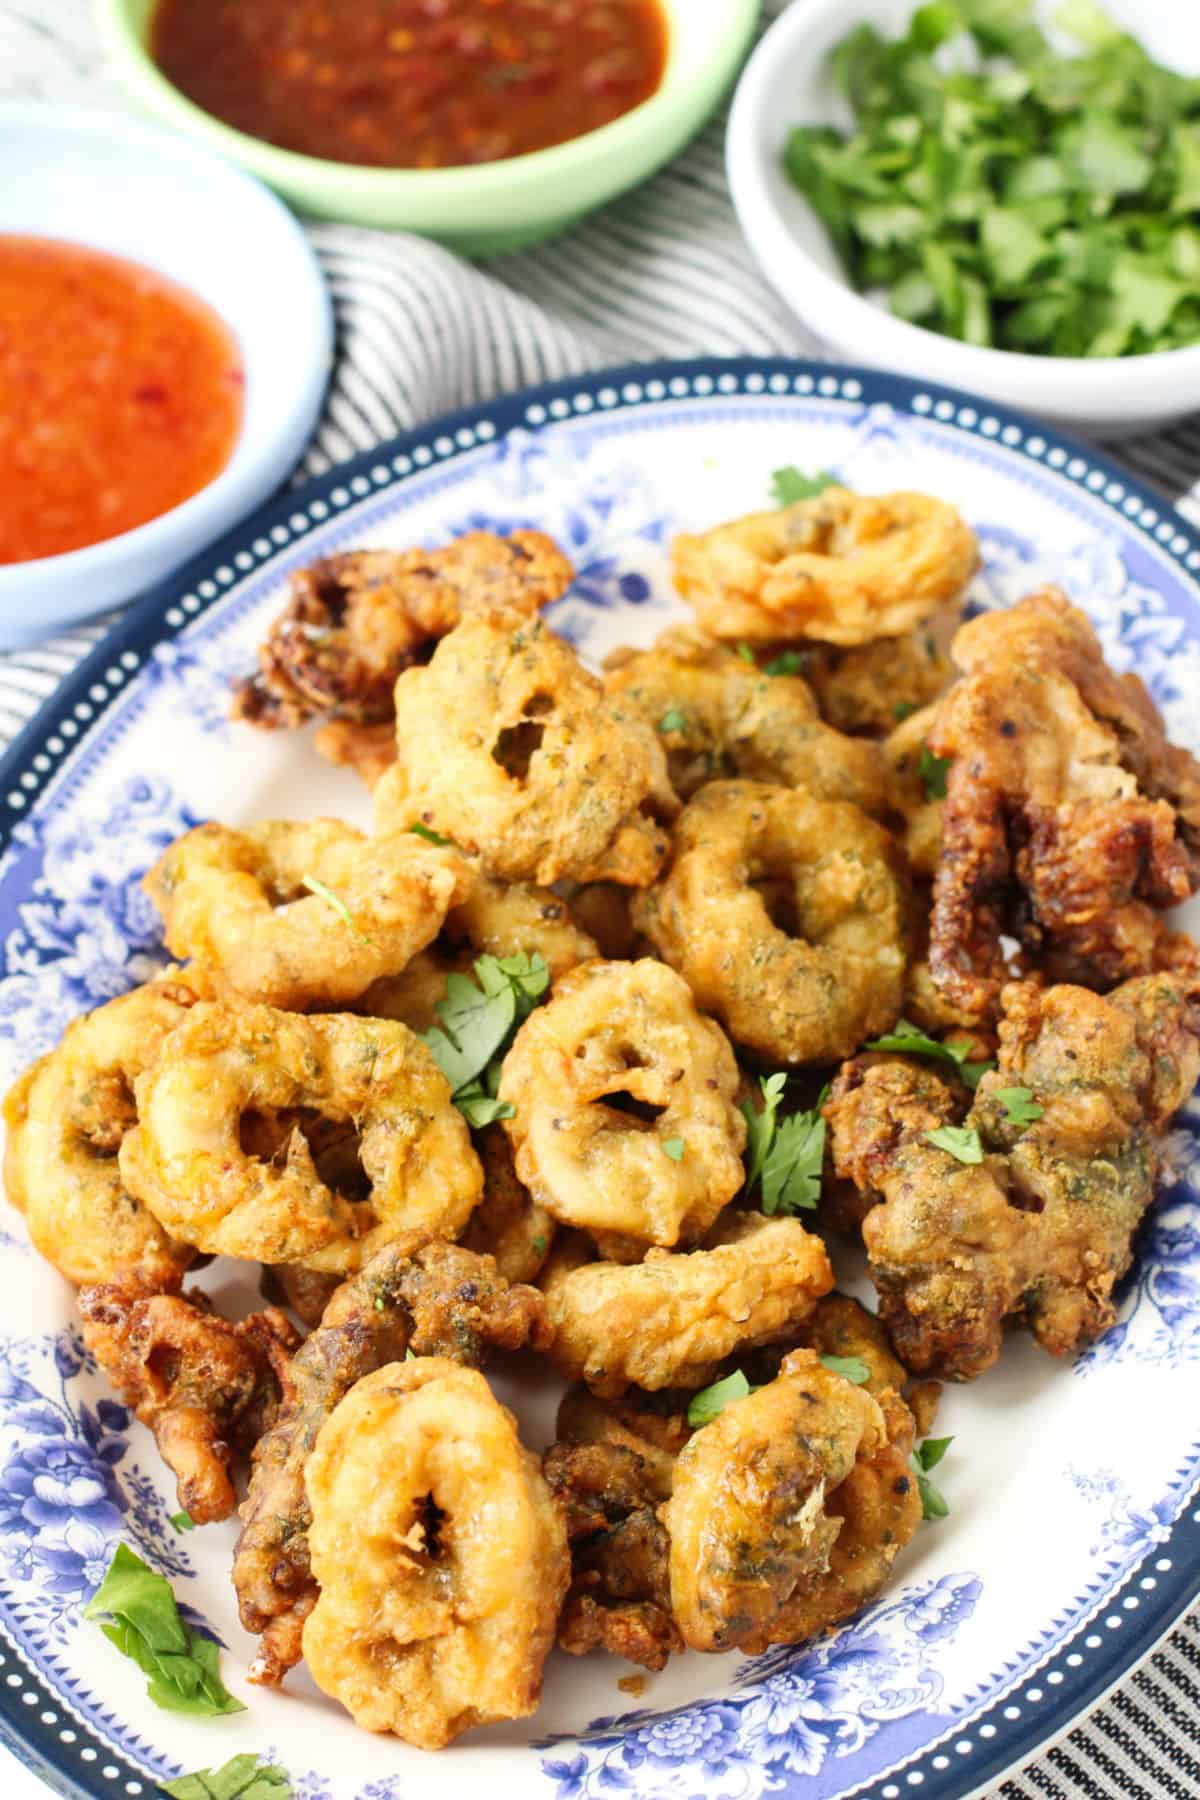 Salt and Pepper Squid with dipping sauces on a platter.